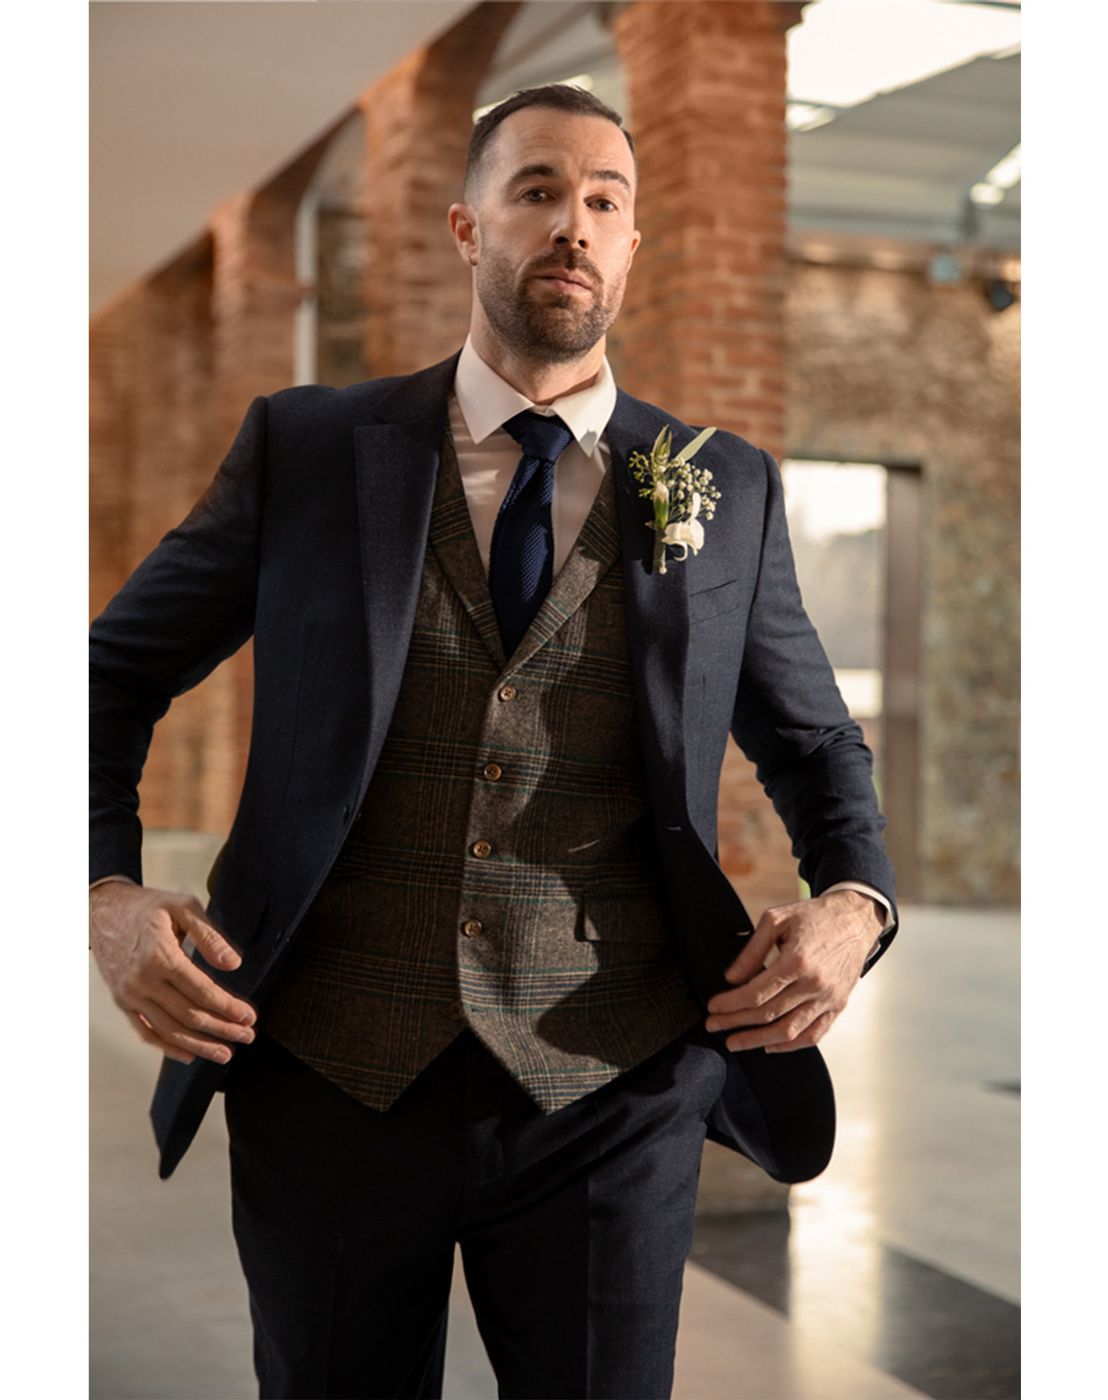 Wedding Guest Suit Guide for 2022 - Hockerty